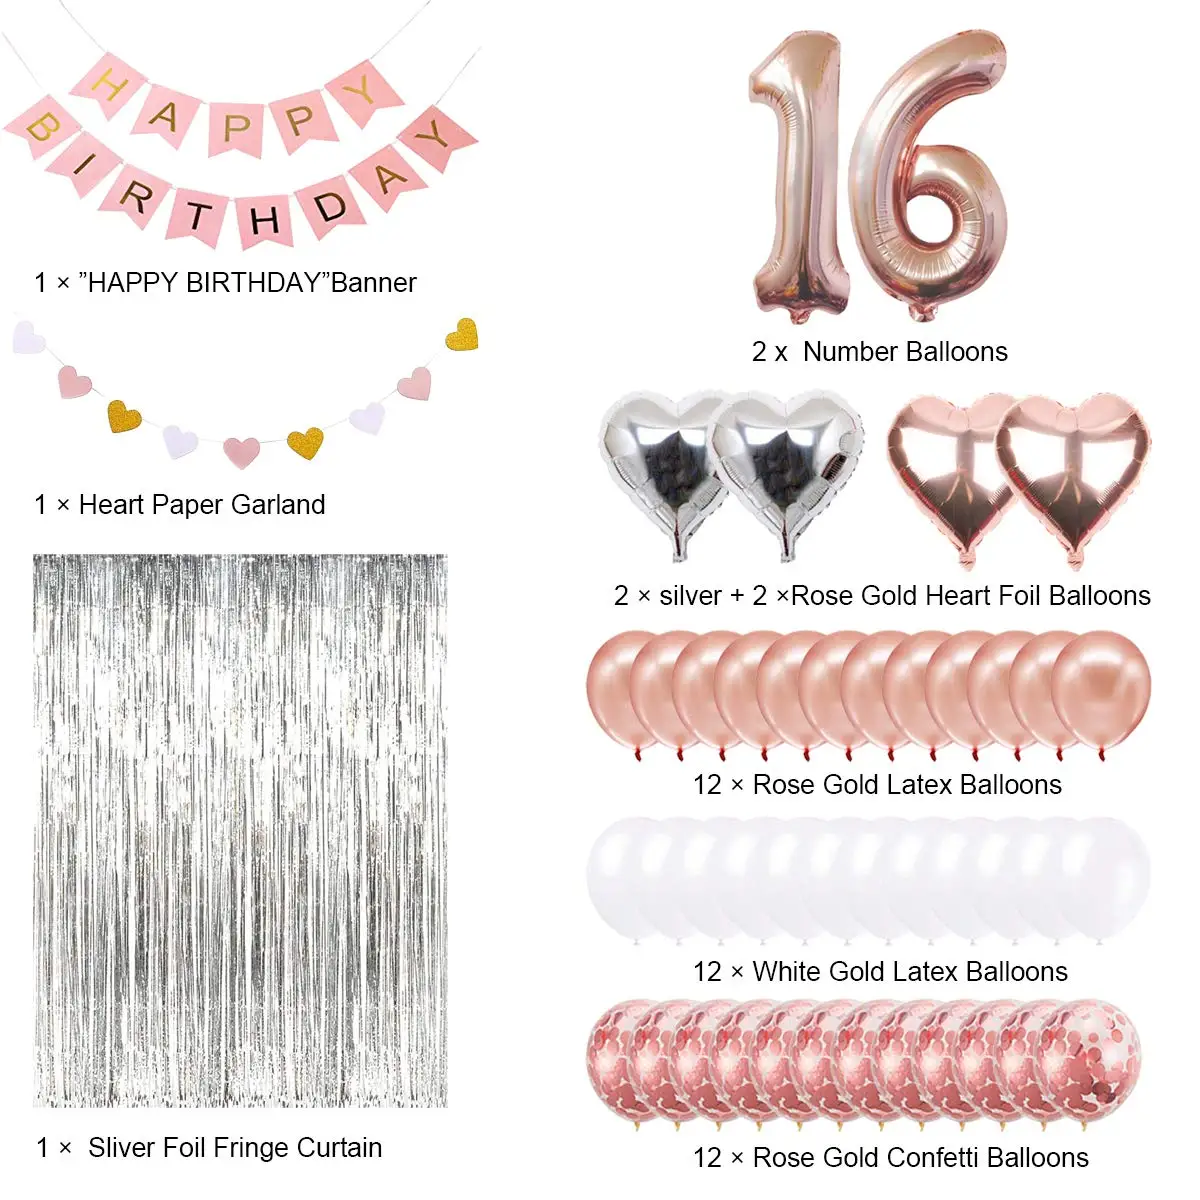 16th Anniversaire Decorations Banniere Joyeux Anniversaire Banniere 16 Ans Anniversaire Decoration Fournitures Sweet Sixteen Decoration Buy 16th Decorations D Anniversaire Fournitures De Fete En Or Rose Decoration Sweet Seize Product On Alibaba Com